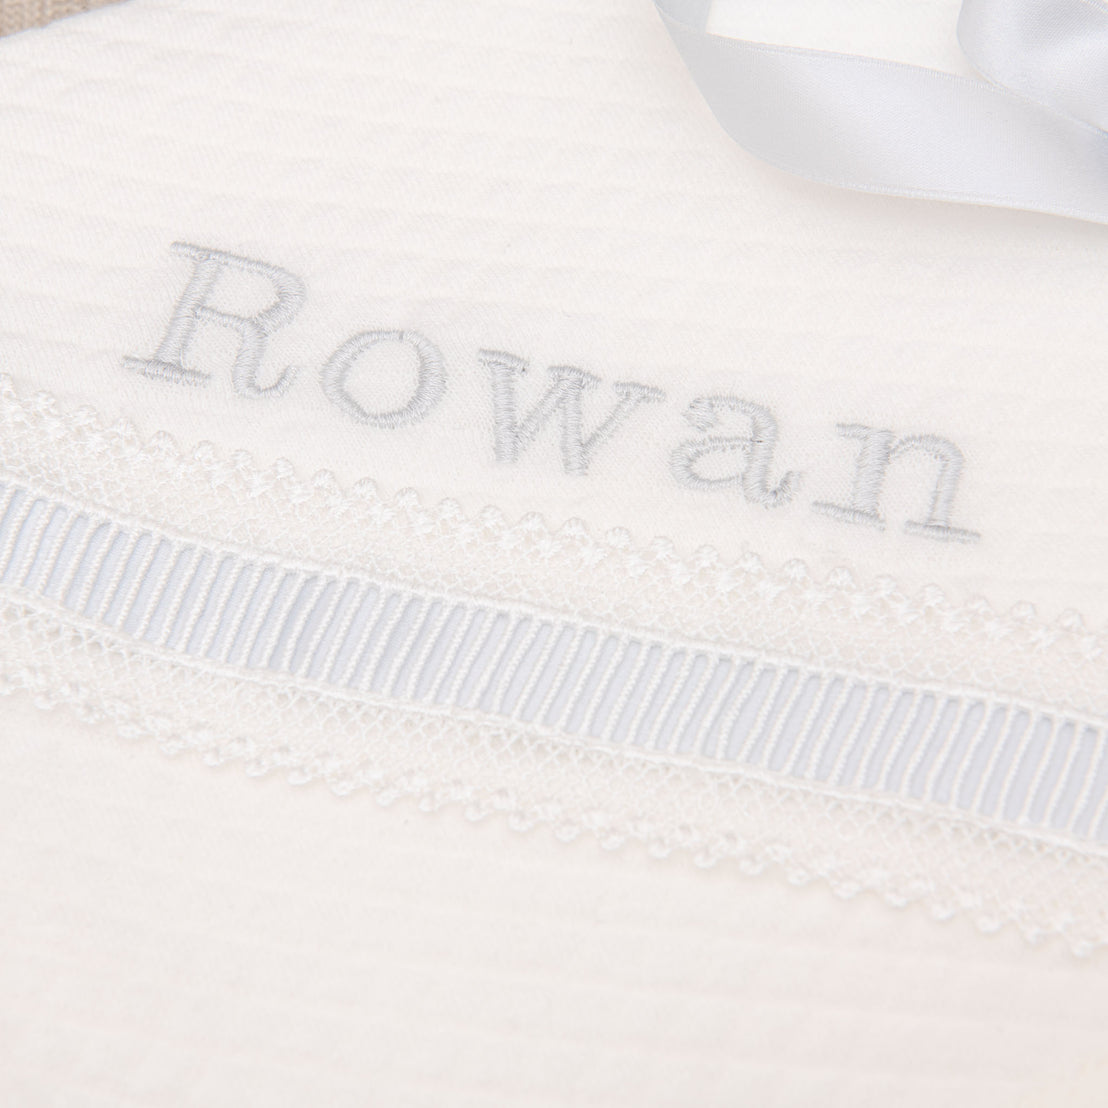 Detail of embroidered name Rowan in silk on the personalized baptism blanket.